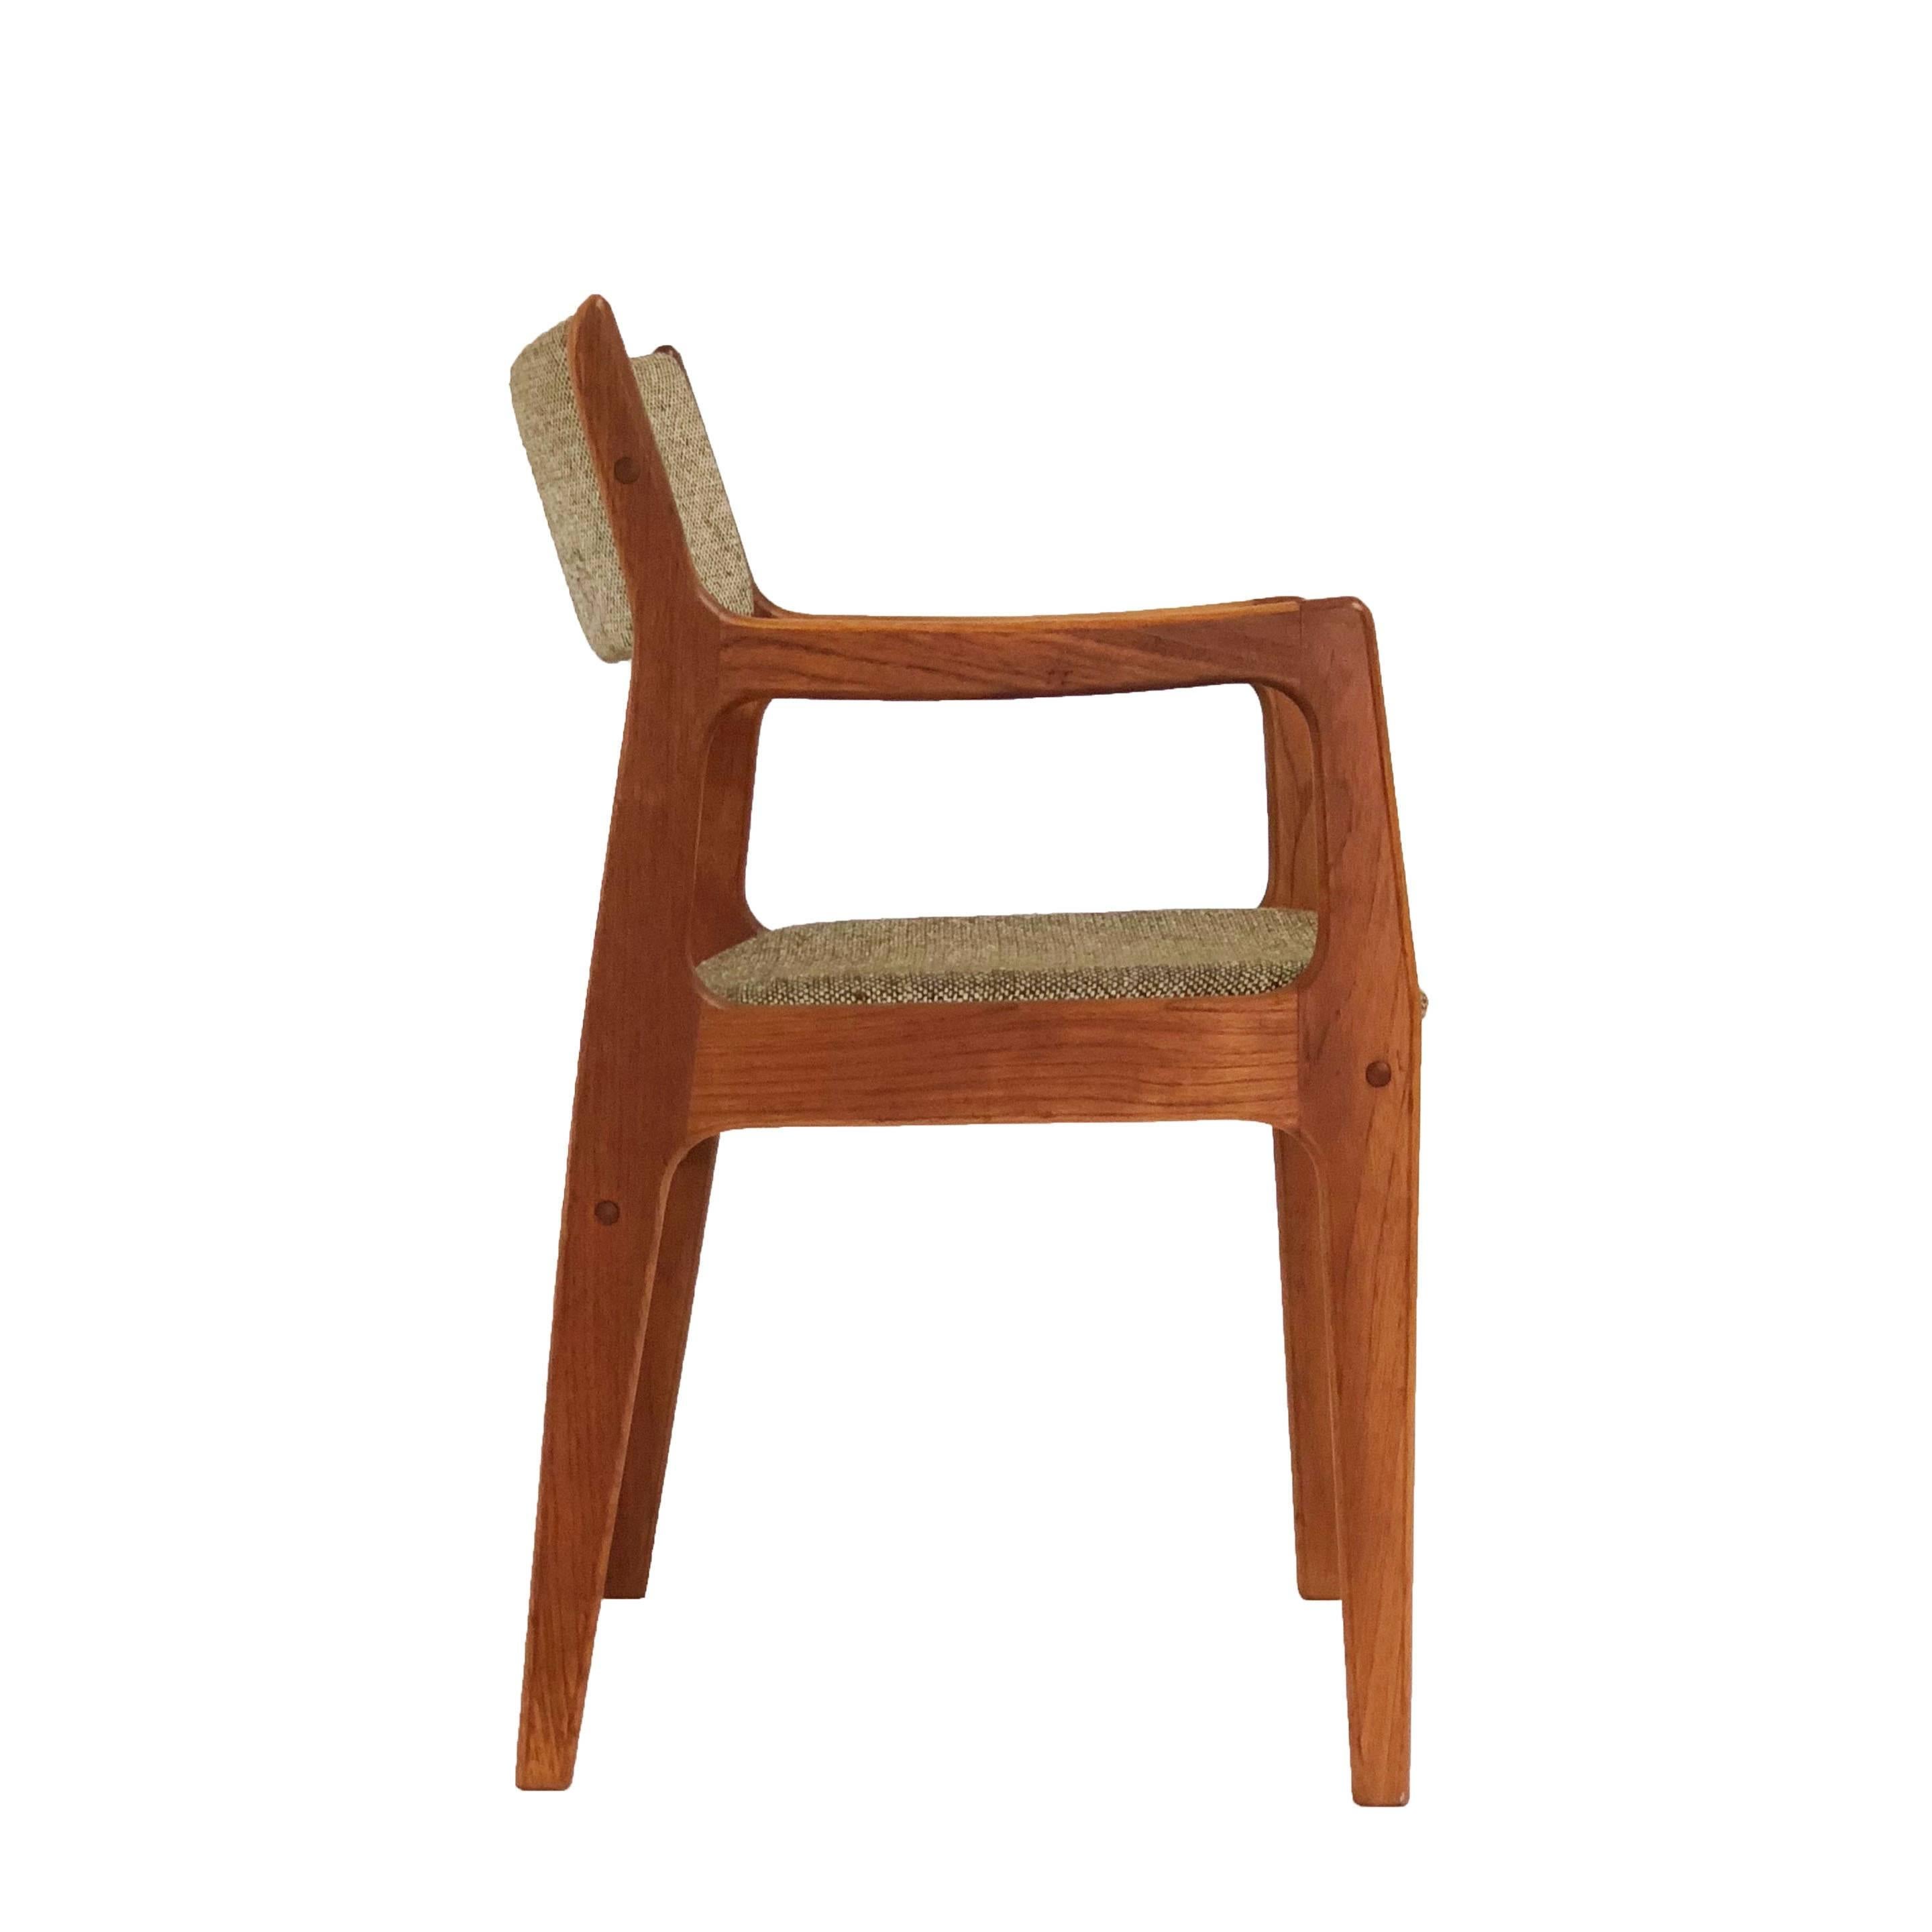 Mid-Century Modern teak dining chairs by Dixie Furniture Co. Frames are in excellent condition and fabric is in good condition. There are four side chairs and two captains chairs. Age appropriate wear. Please contact for shipping